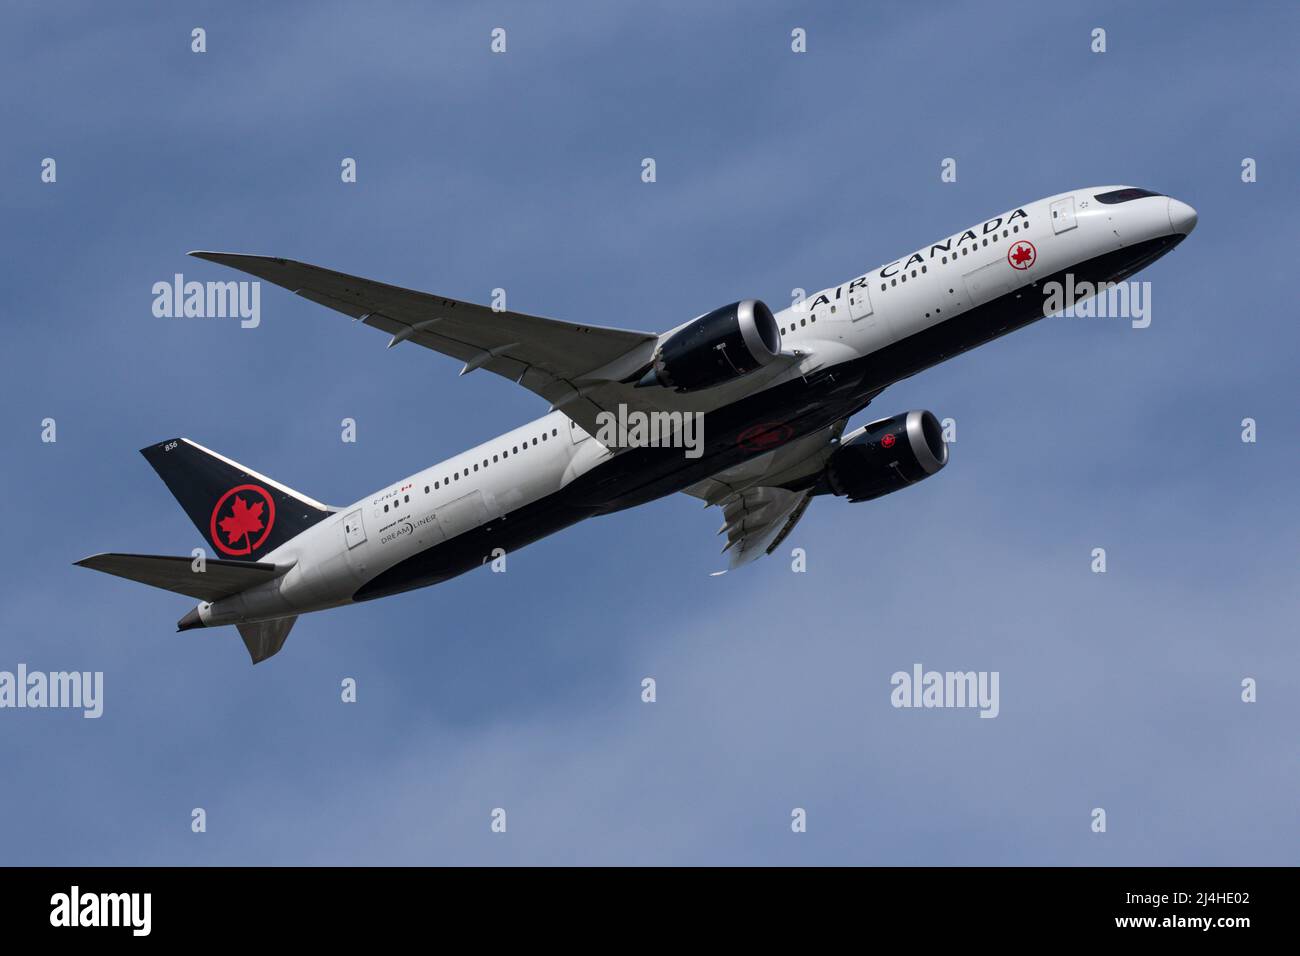 A Boeing 787 operated by Air Canada departs from London Heathrow Airport Stock Photo